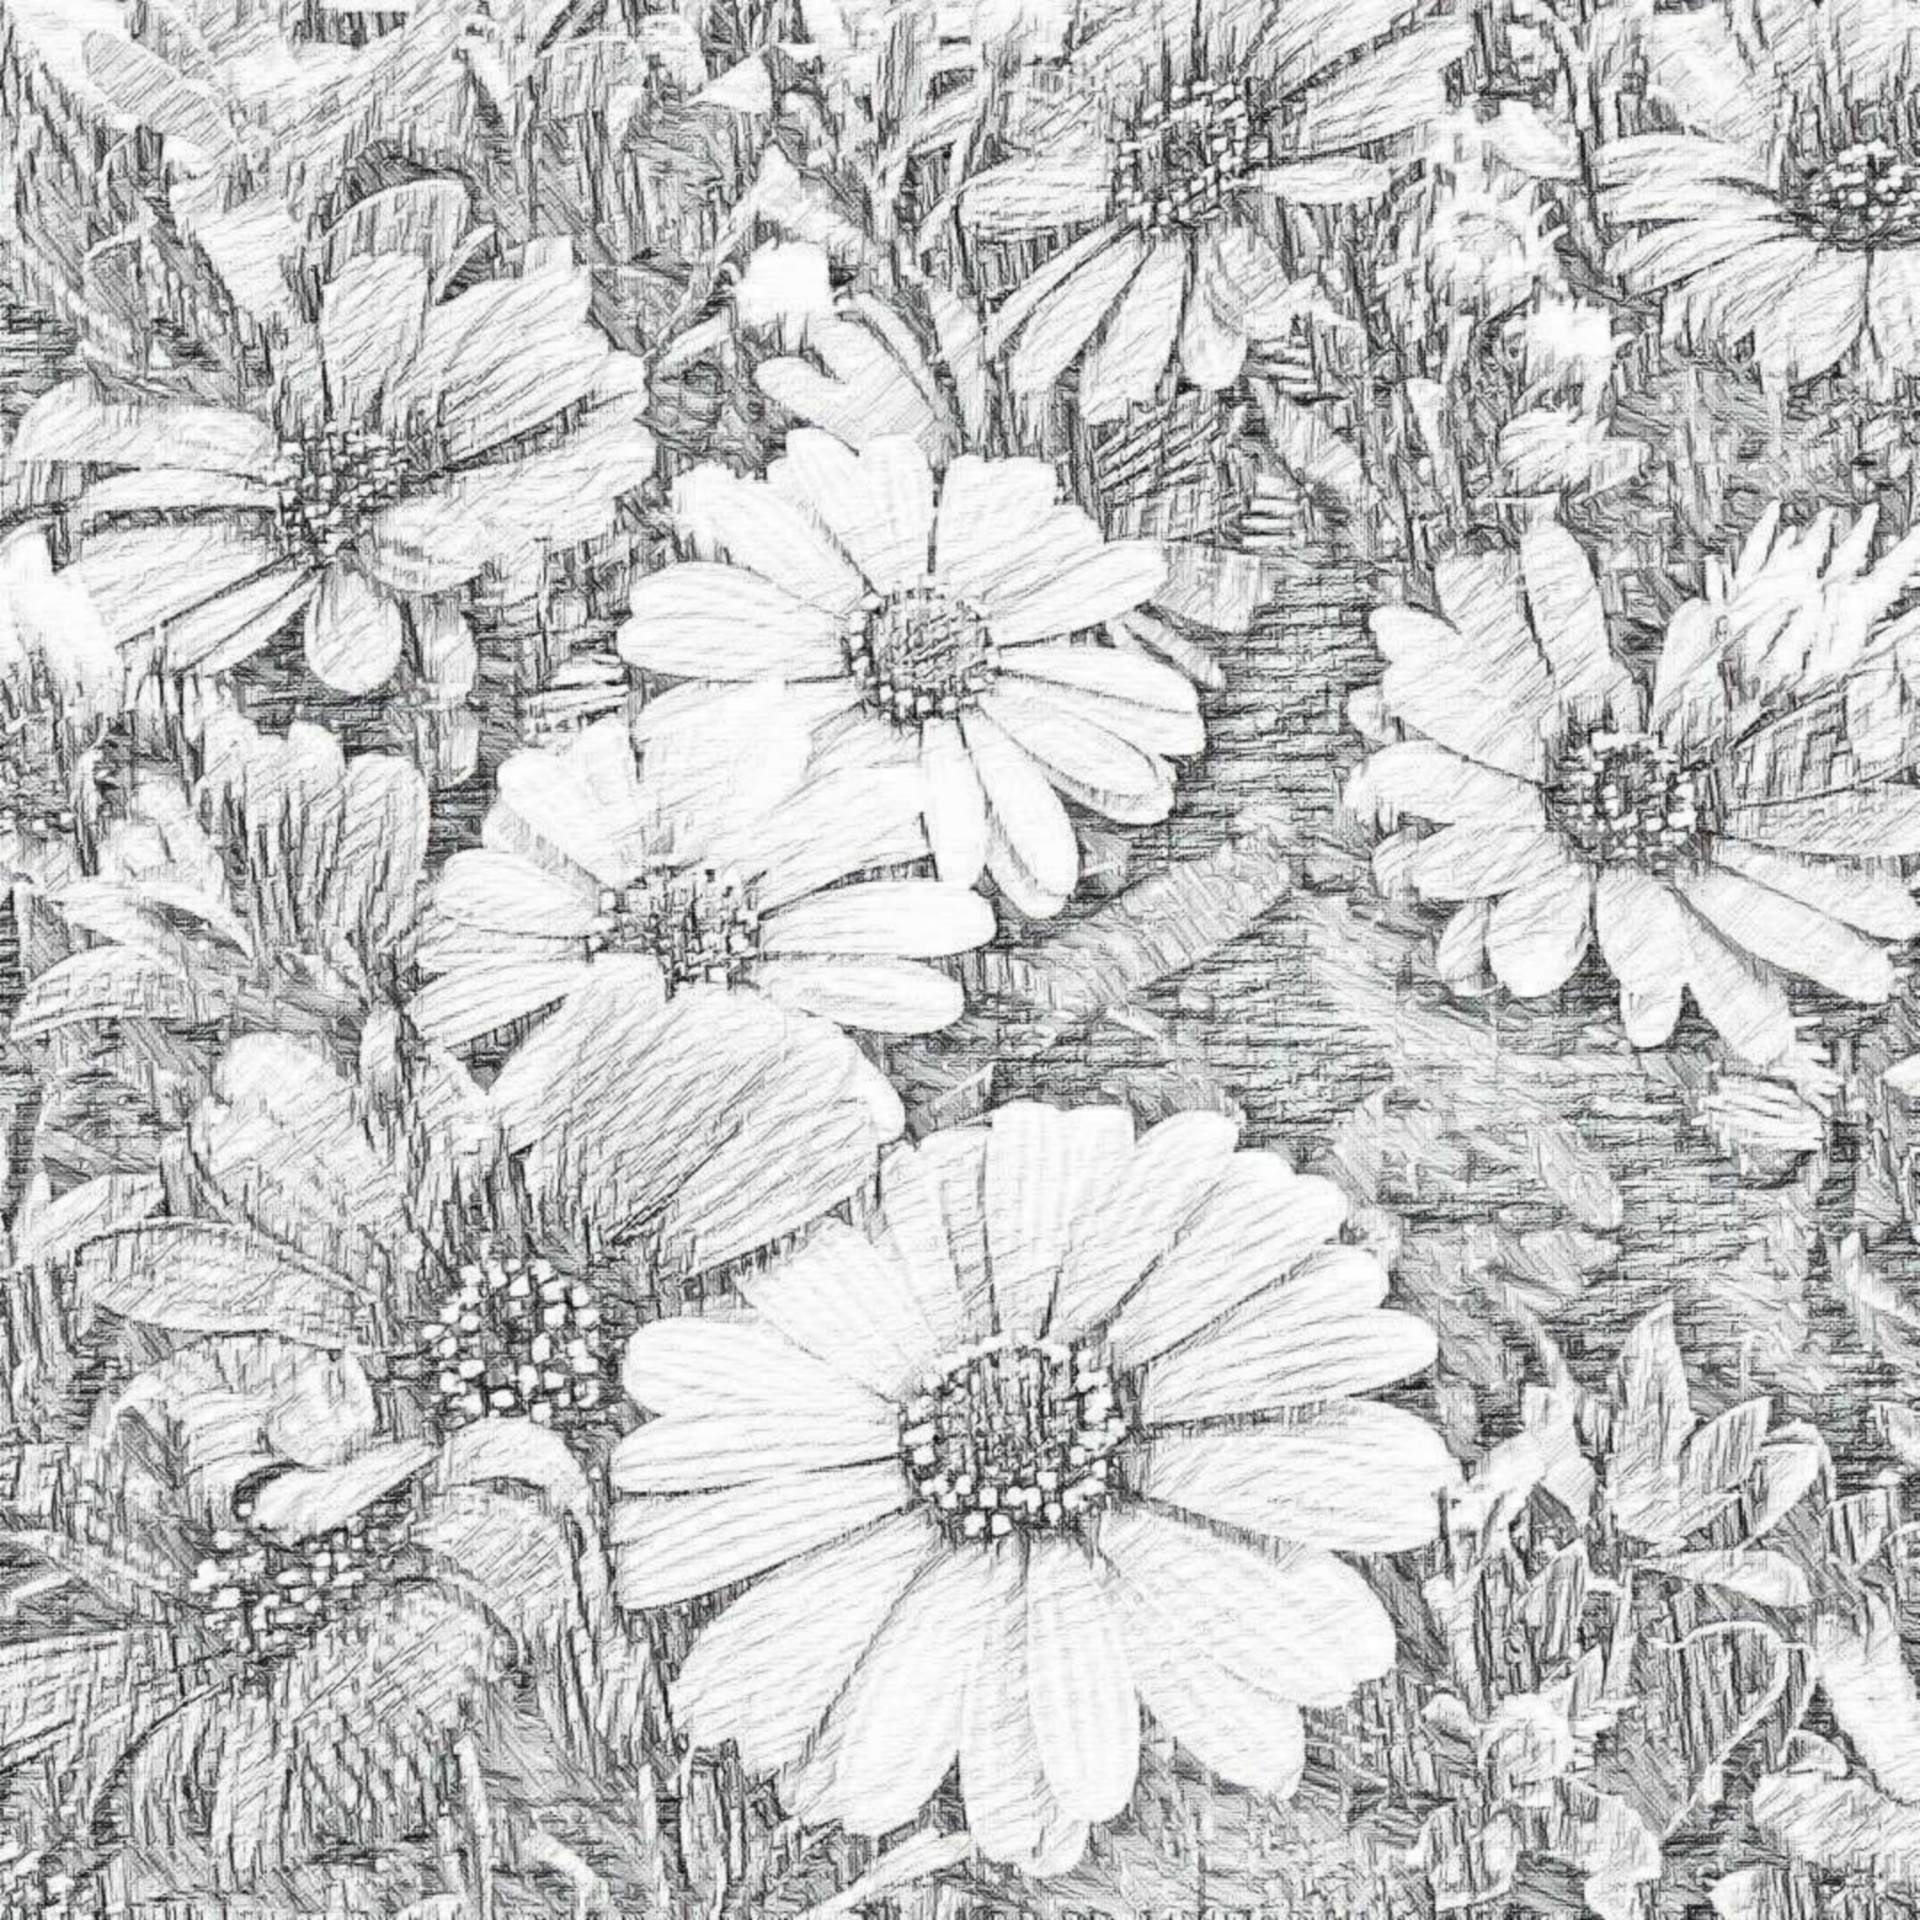 Sketch,free Pictures, Free Photos, Free Images, Royalty - Daisy - HD Wallpaper 